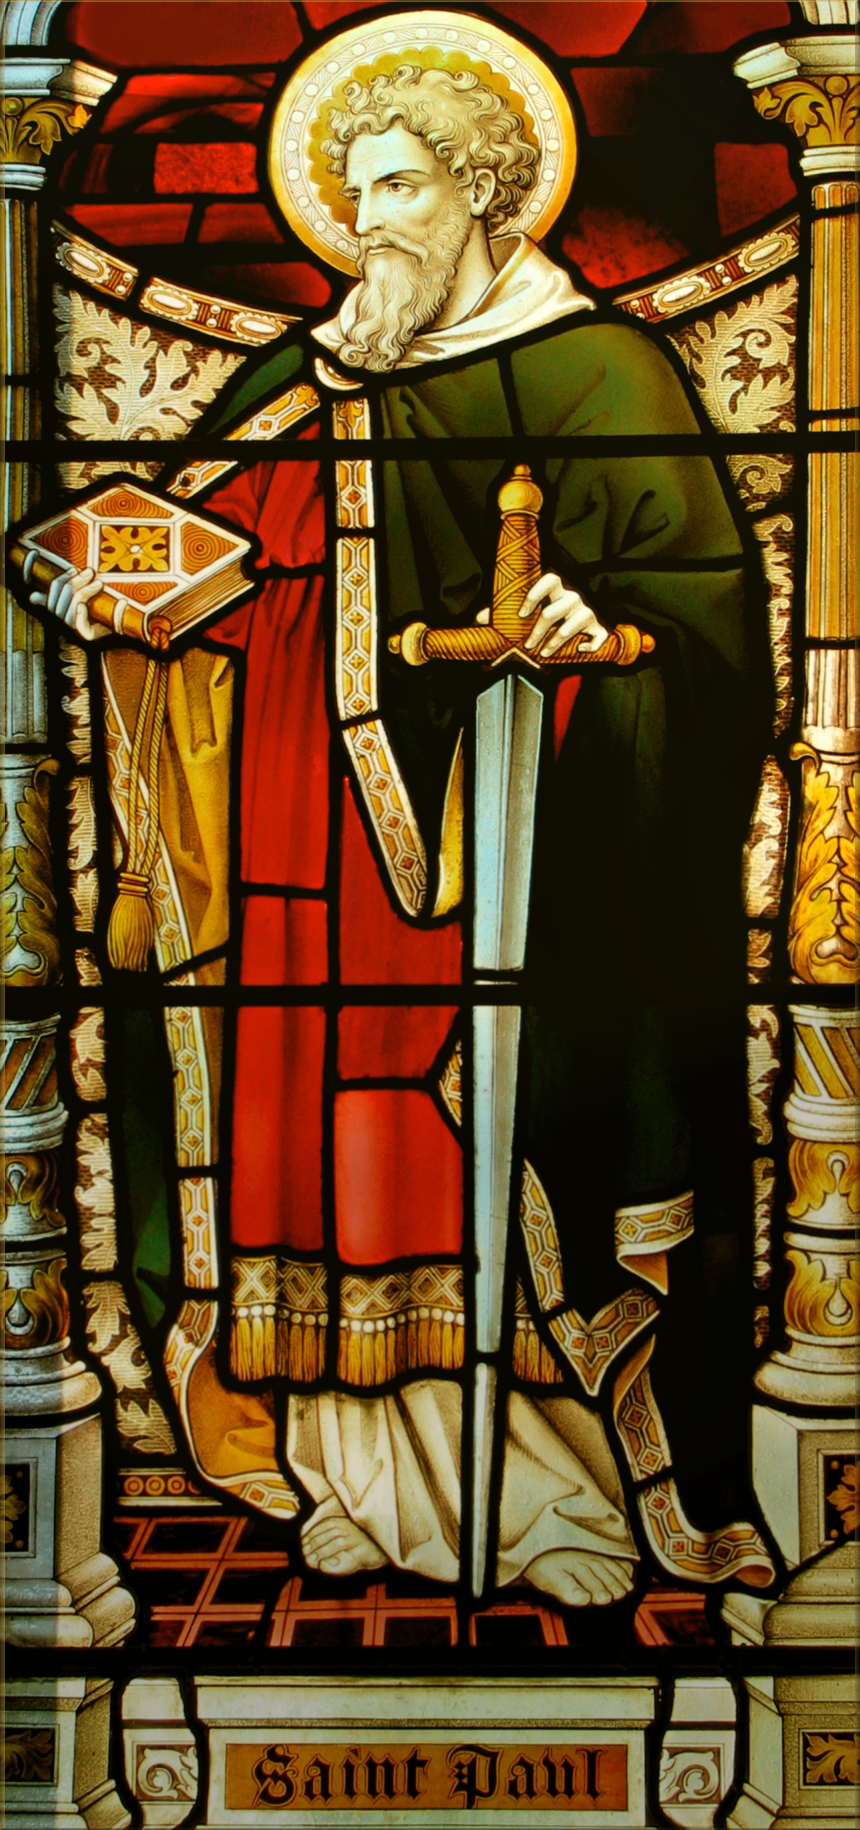 ST. PAUL IN STAINED GLASS